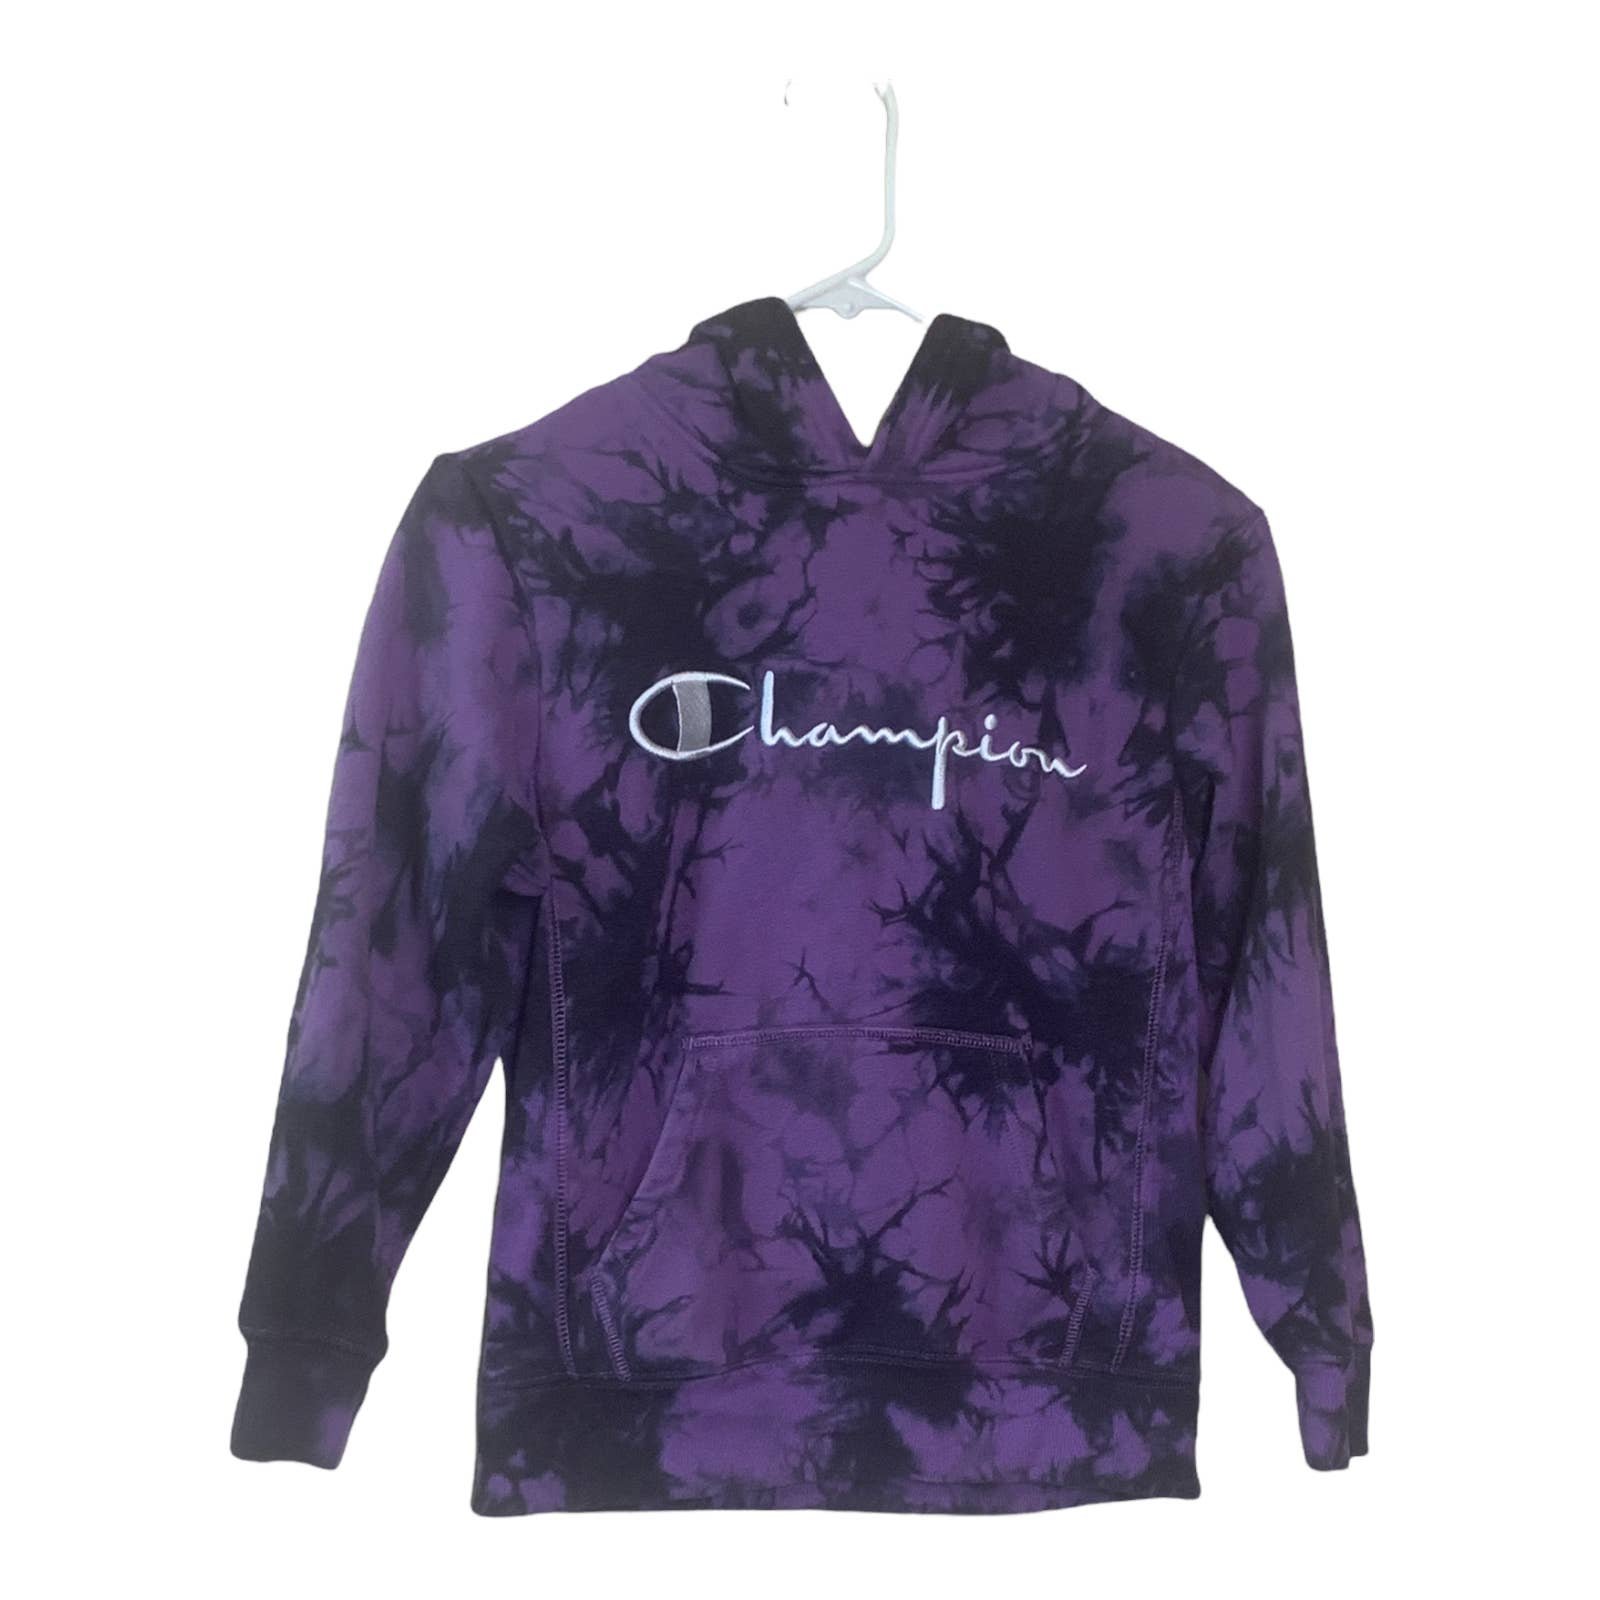 Gorgeous Champion purple Tie dye long sleeves hoodie sweater size small Lm18DEPXg Great